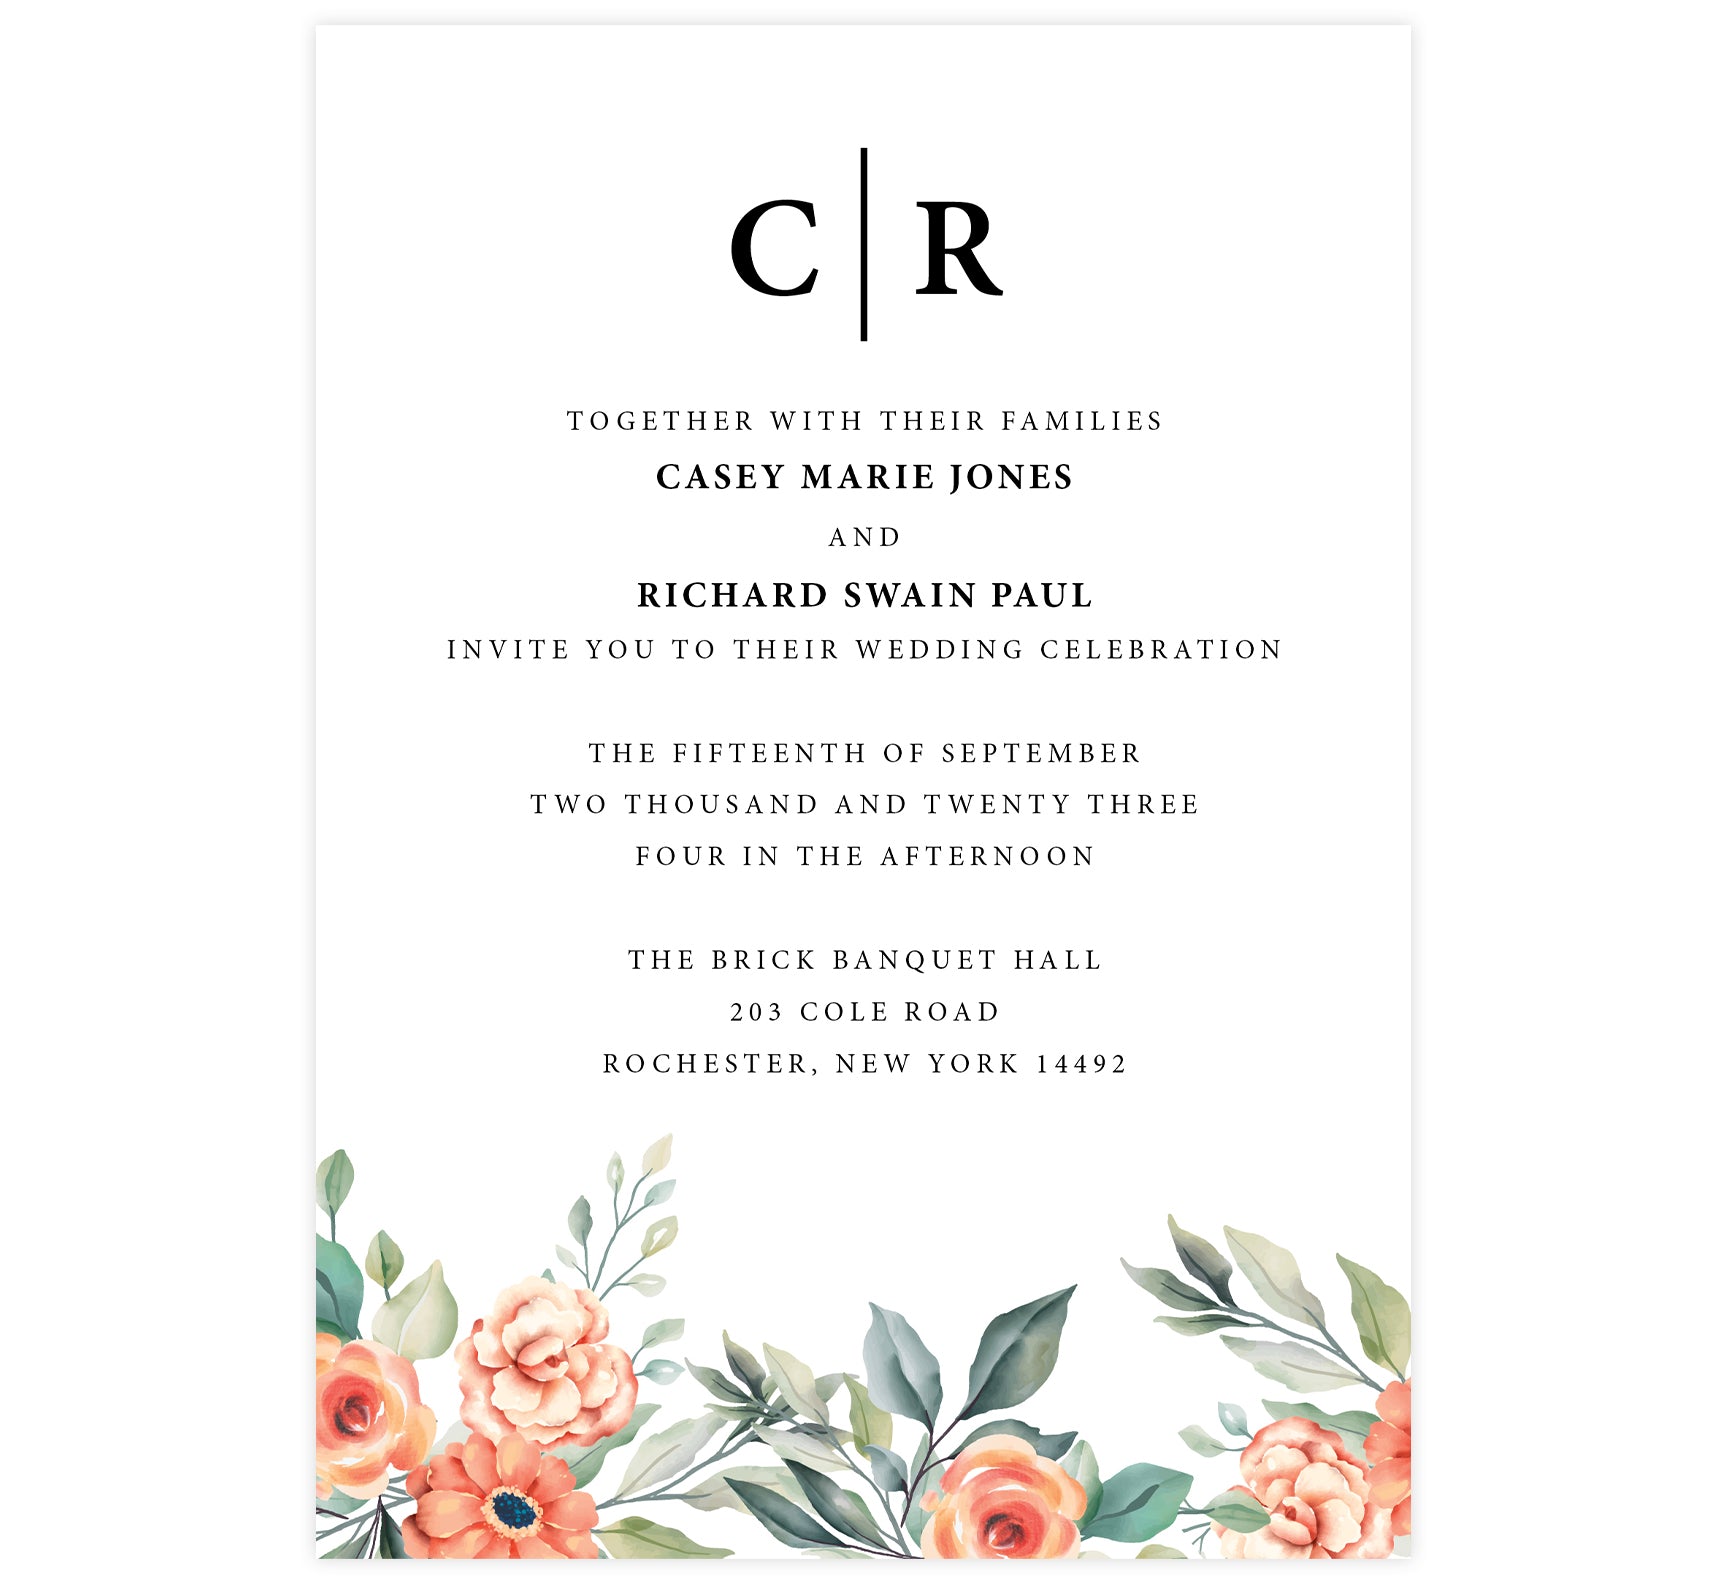 Coral Flowers wedding invitation; white background with black text and coral flowers at the bottom edge